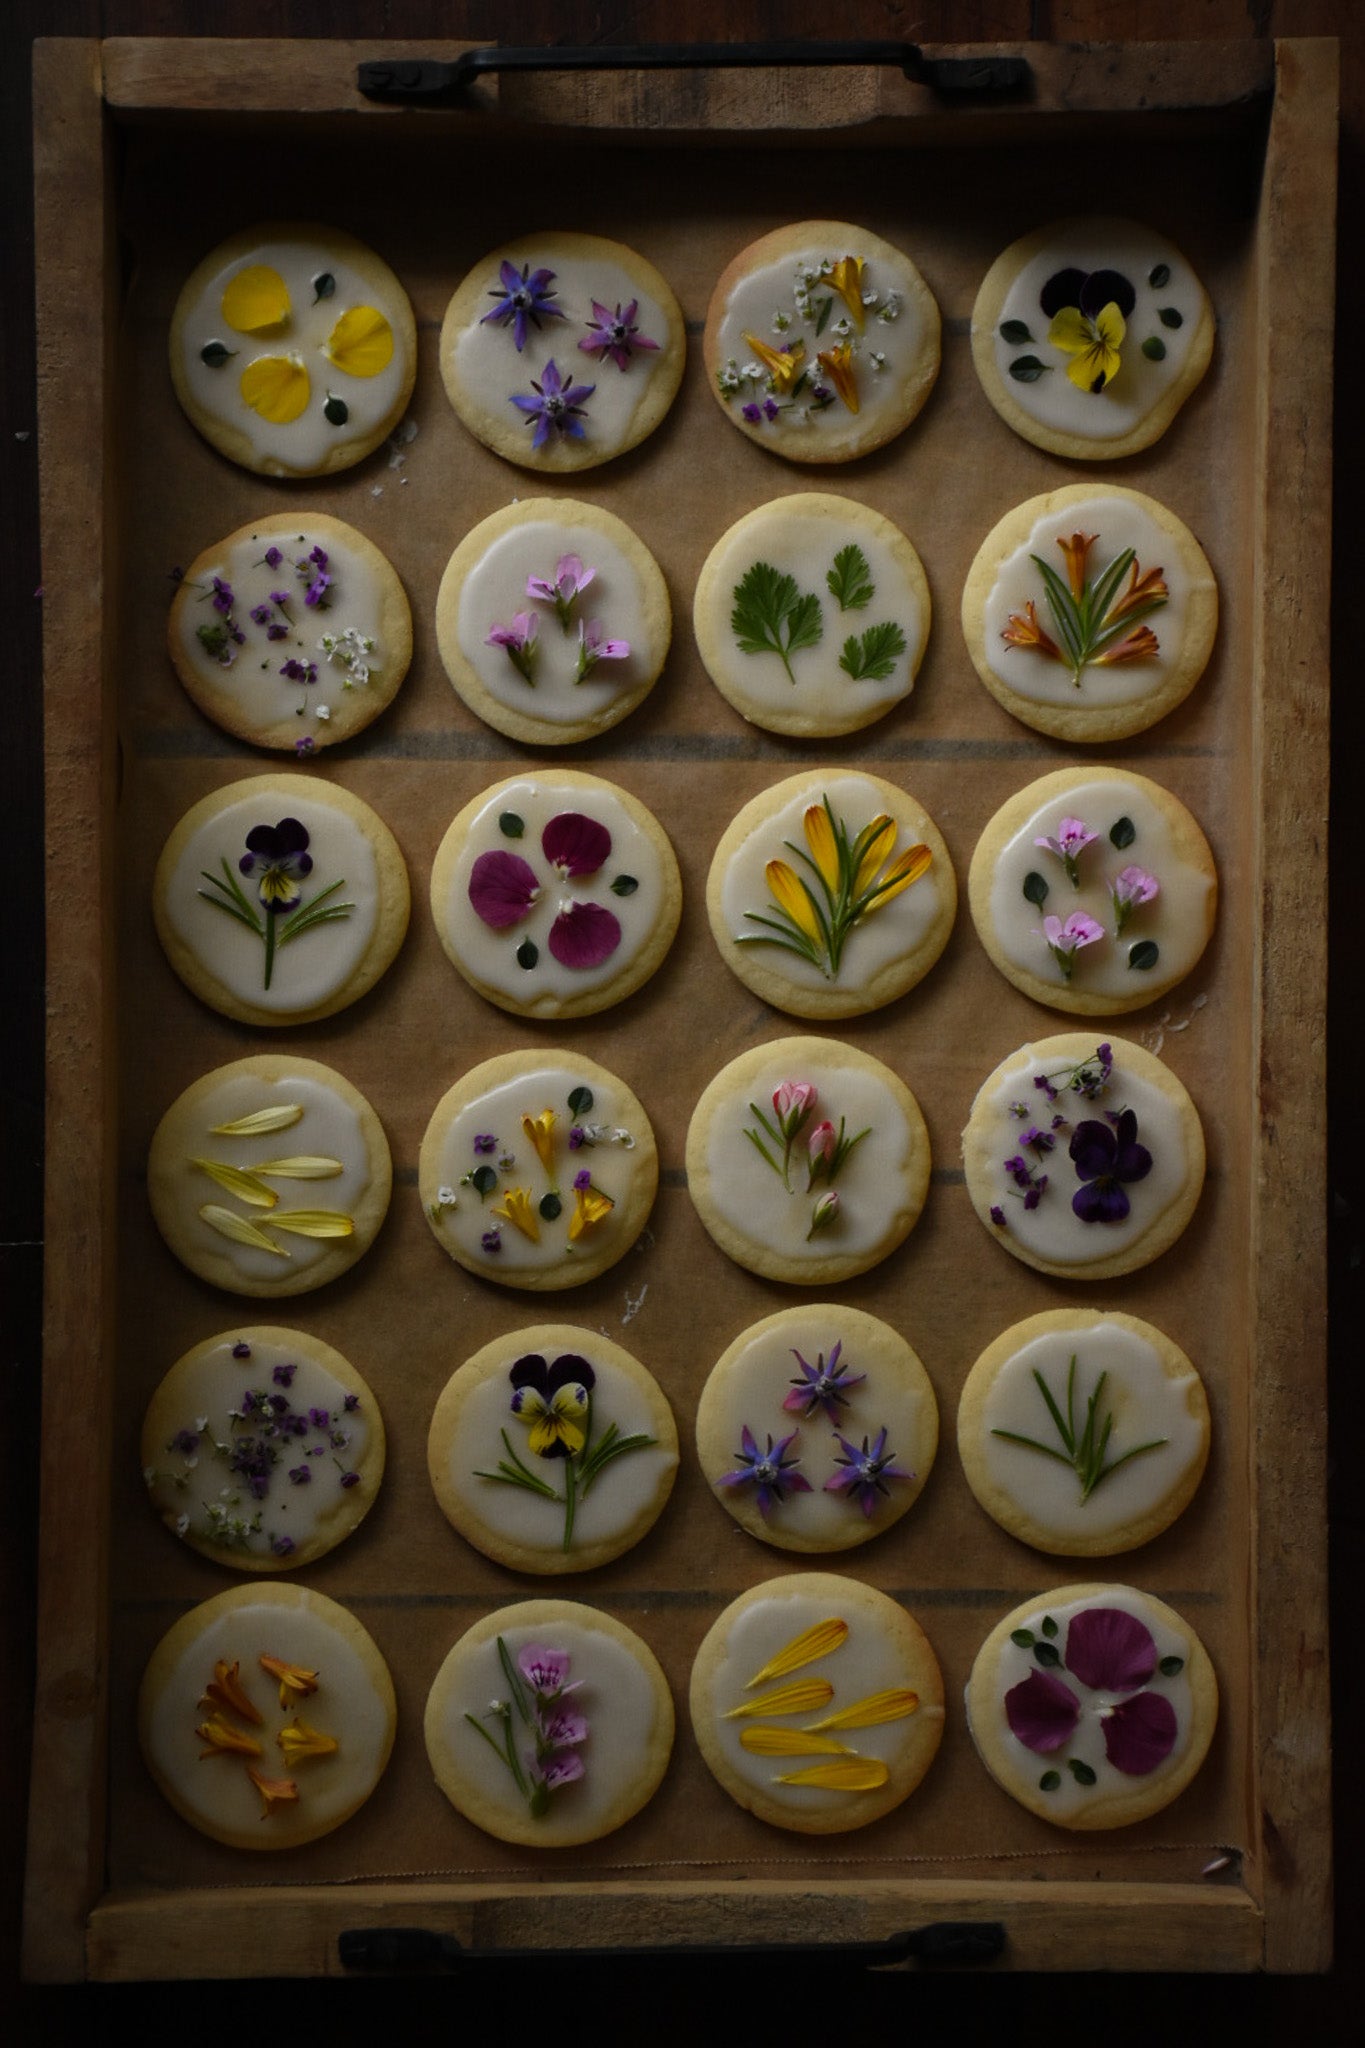 amble and twine dried flowers australia the most beautiful edible flowers cookies a recipe